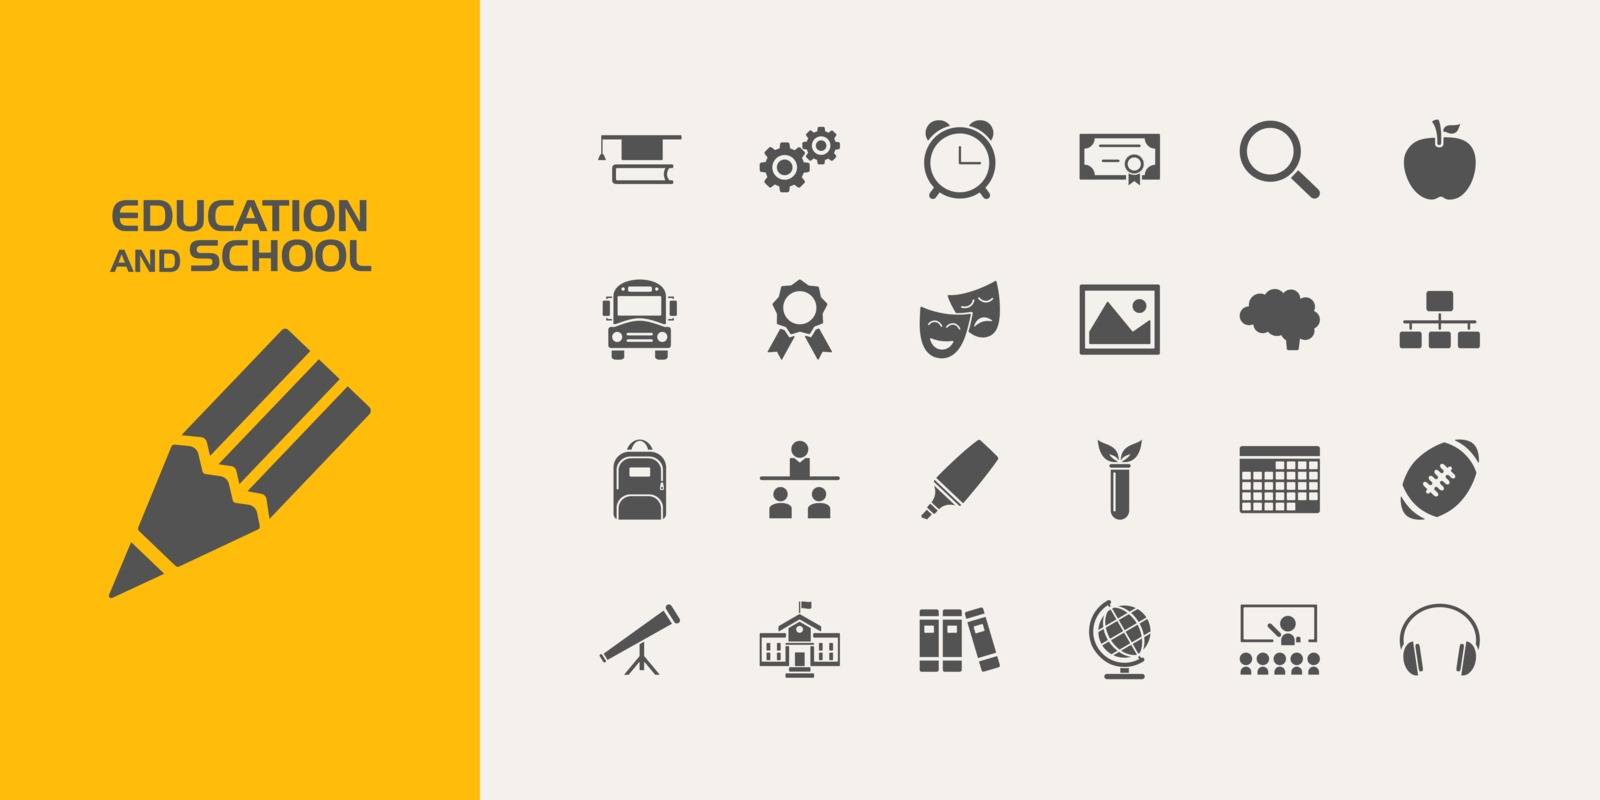 Group of twenty education and school icons by Imaagio